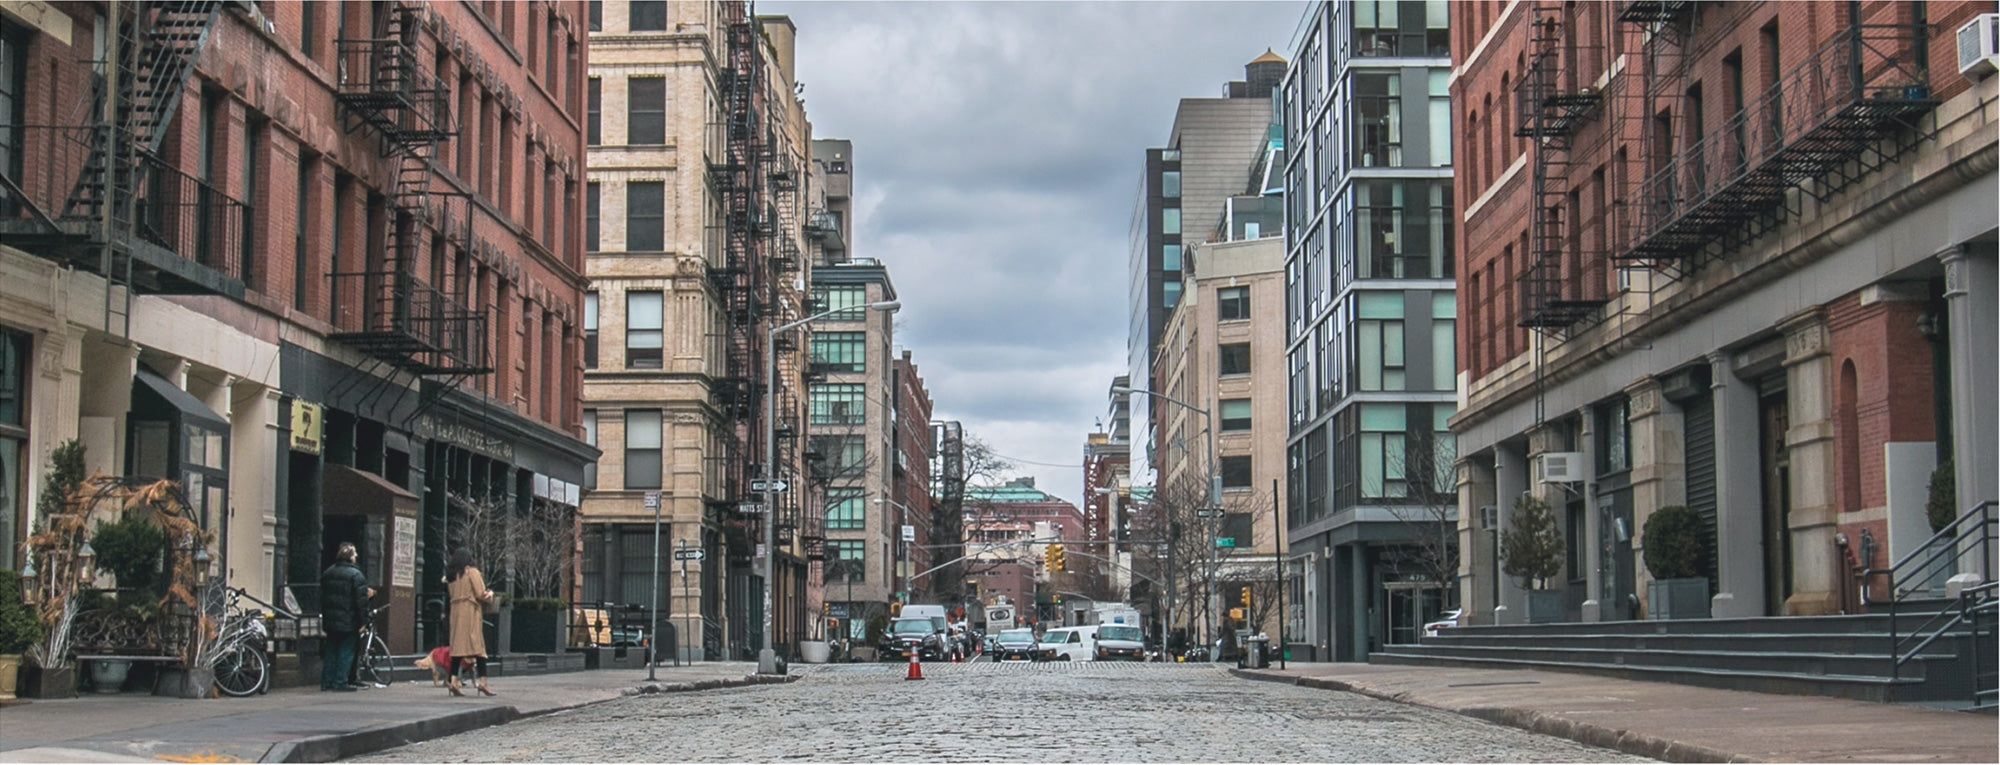 wide angle view of new york street buildings